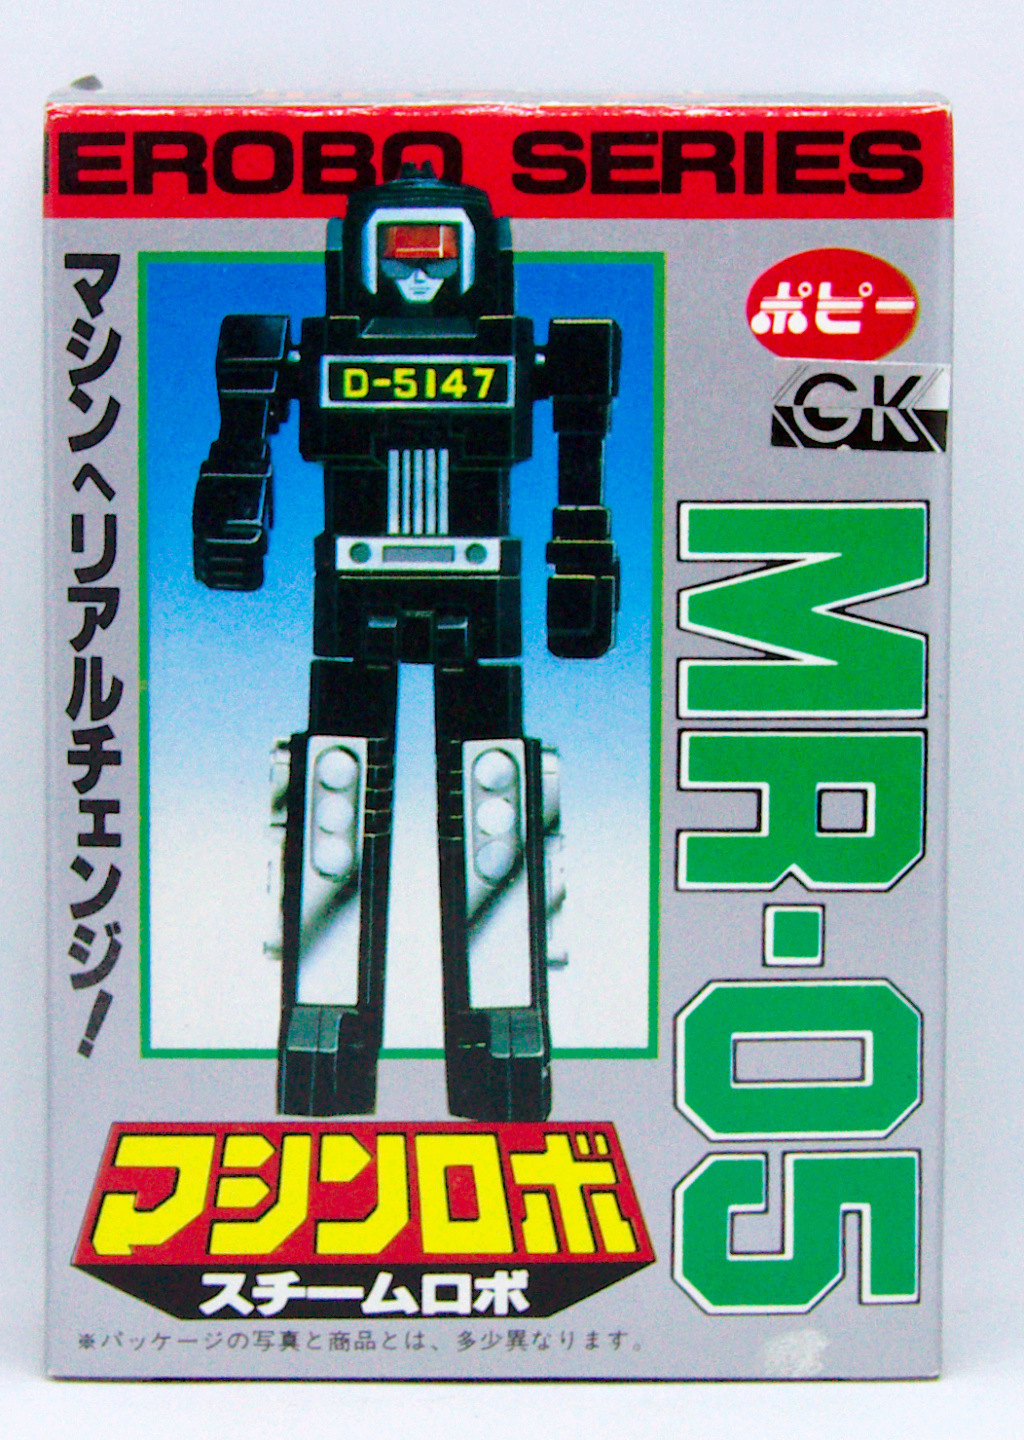 Pilgrim's collection (Gobots, Transformers...) - Page 26 Mr-05_15